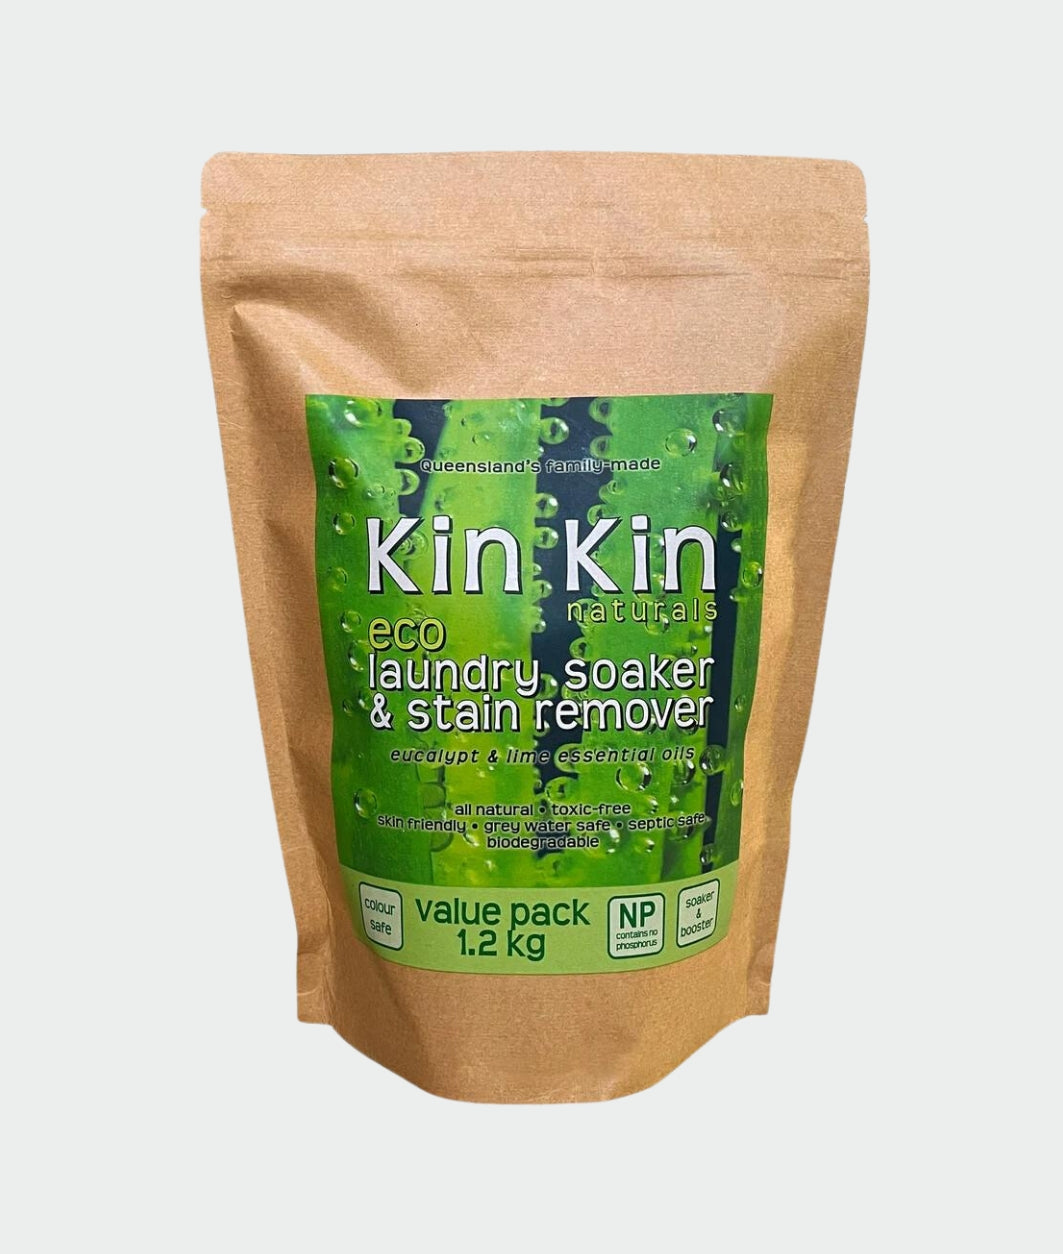 Kin Kin Naturals Laundry Soaker & Stain Remover